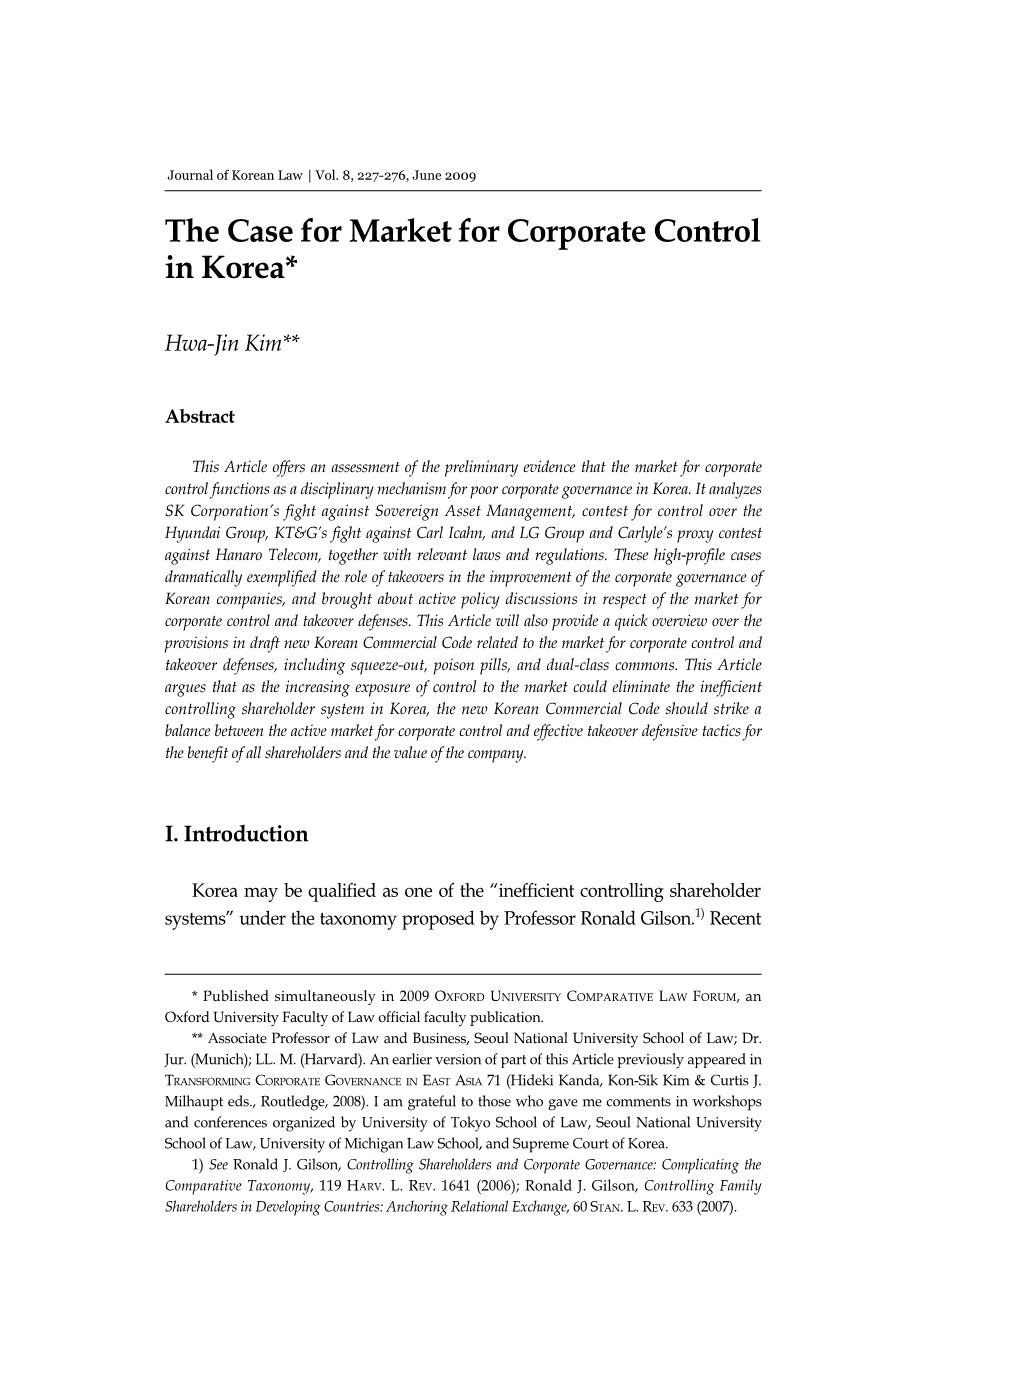 The Case for Market for Corporate Control in Korea*